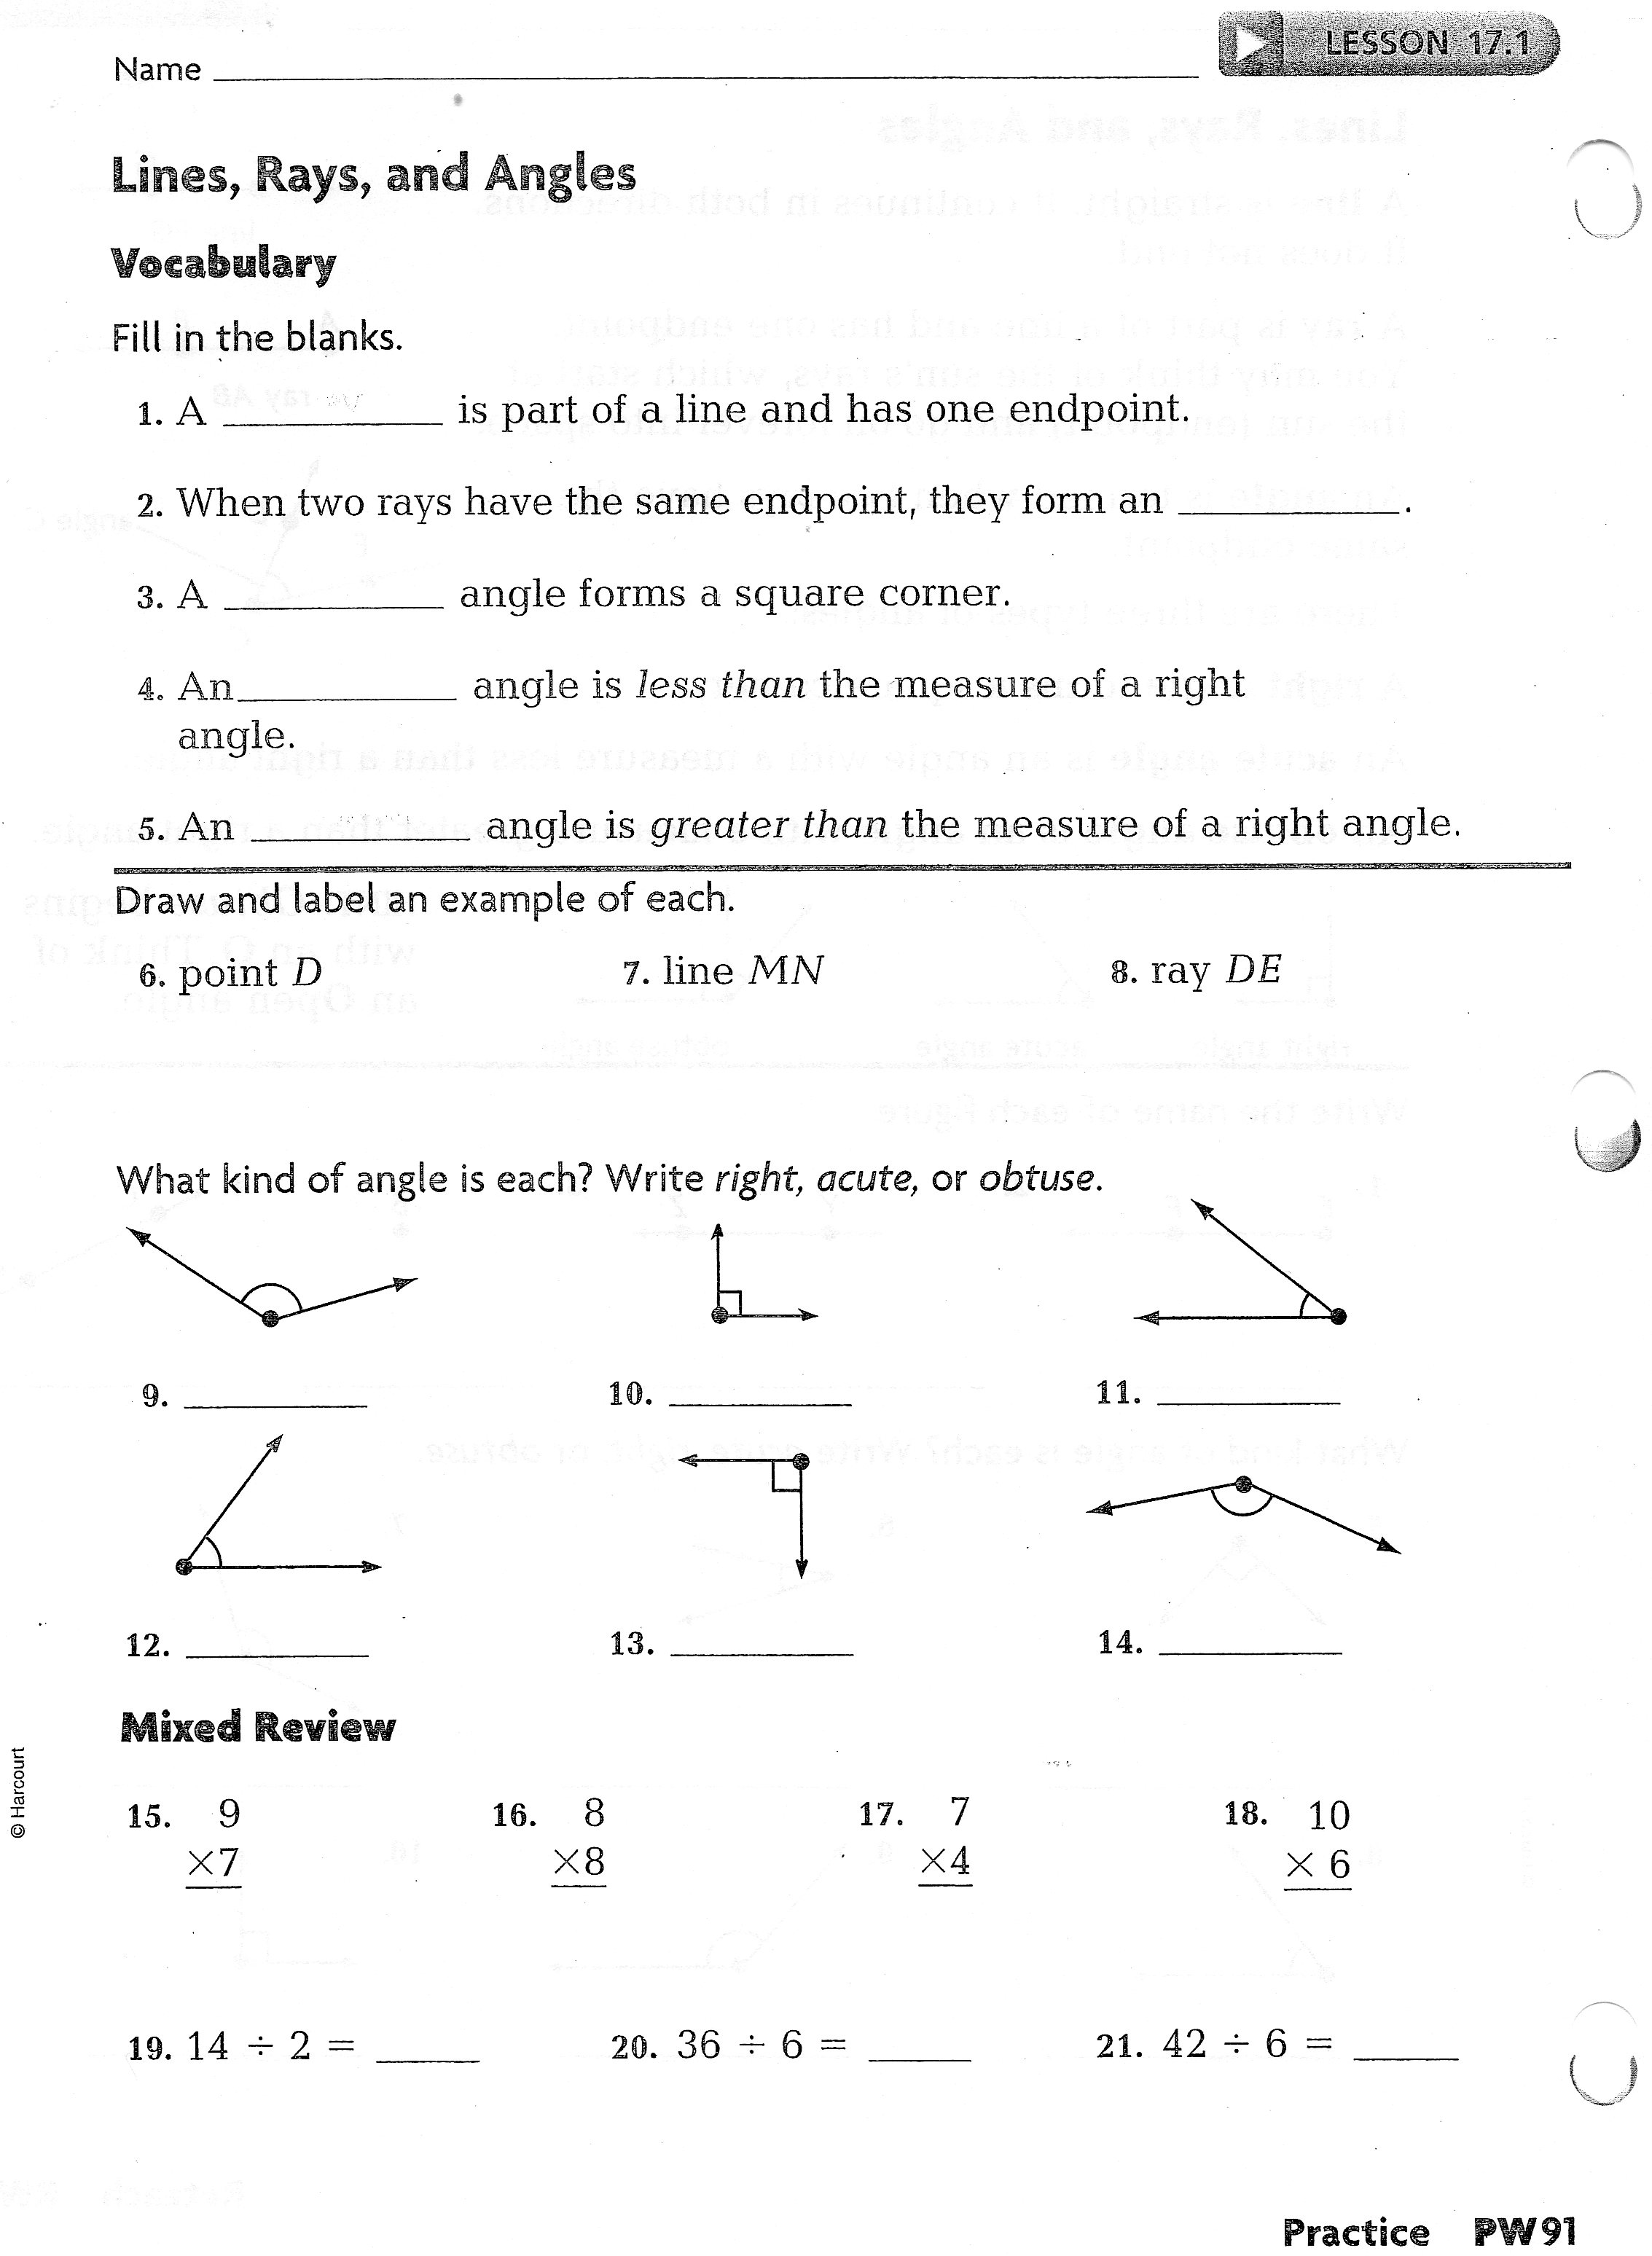 lesson 1 problem solving practice classify angles answers